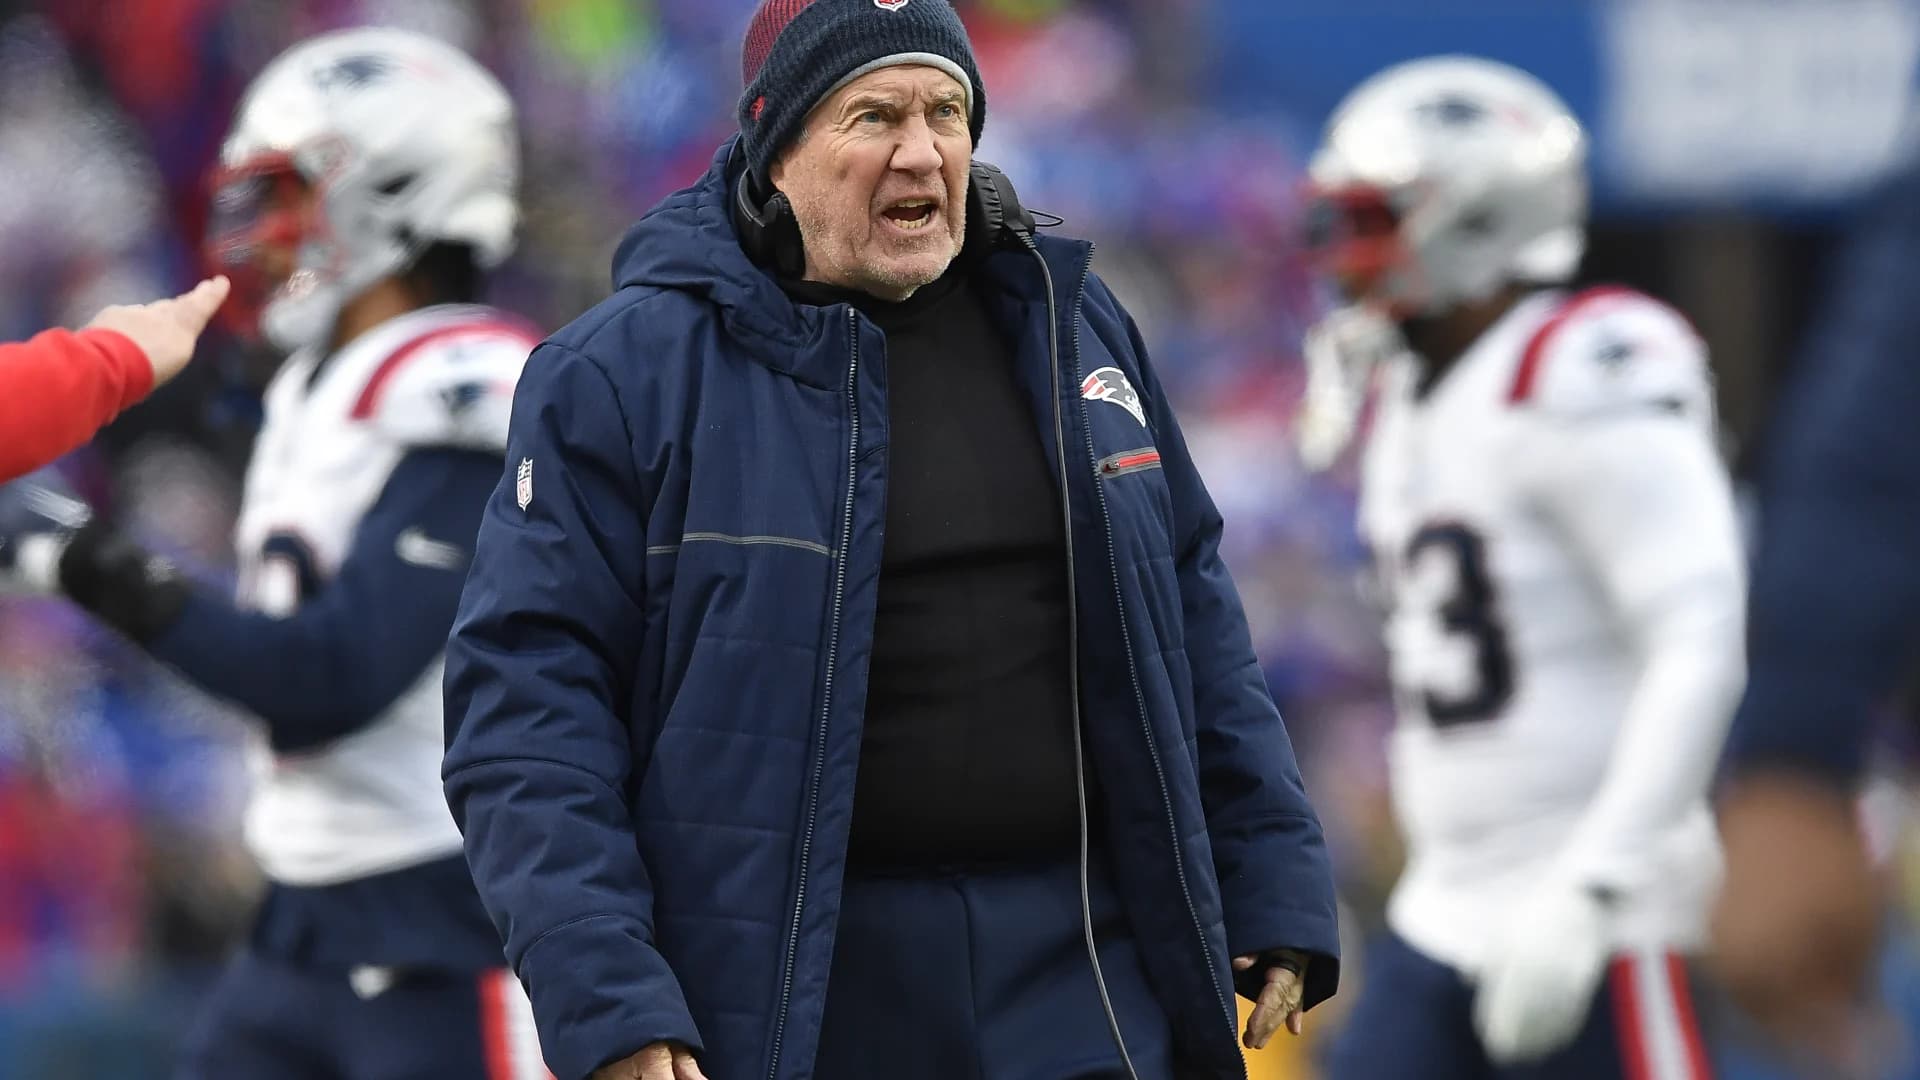 Patriots parting with coach Bill Belichick, who led team to 6 Super Bowl championships